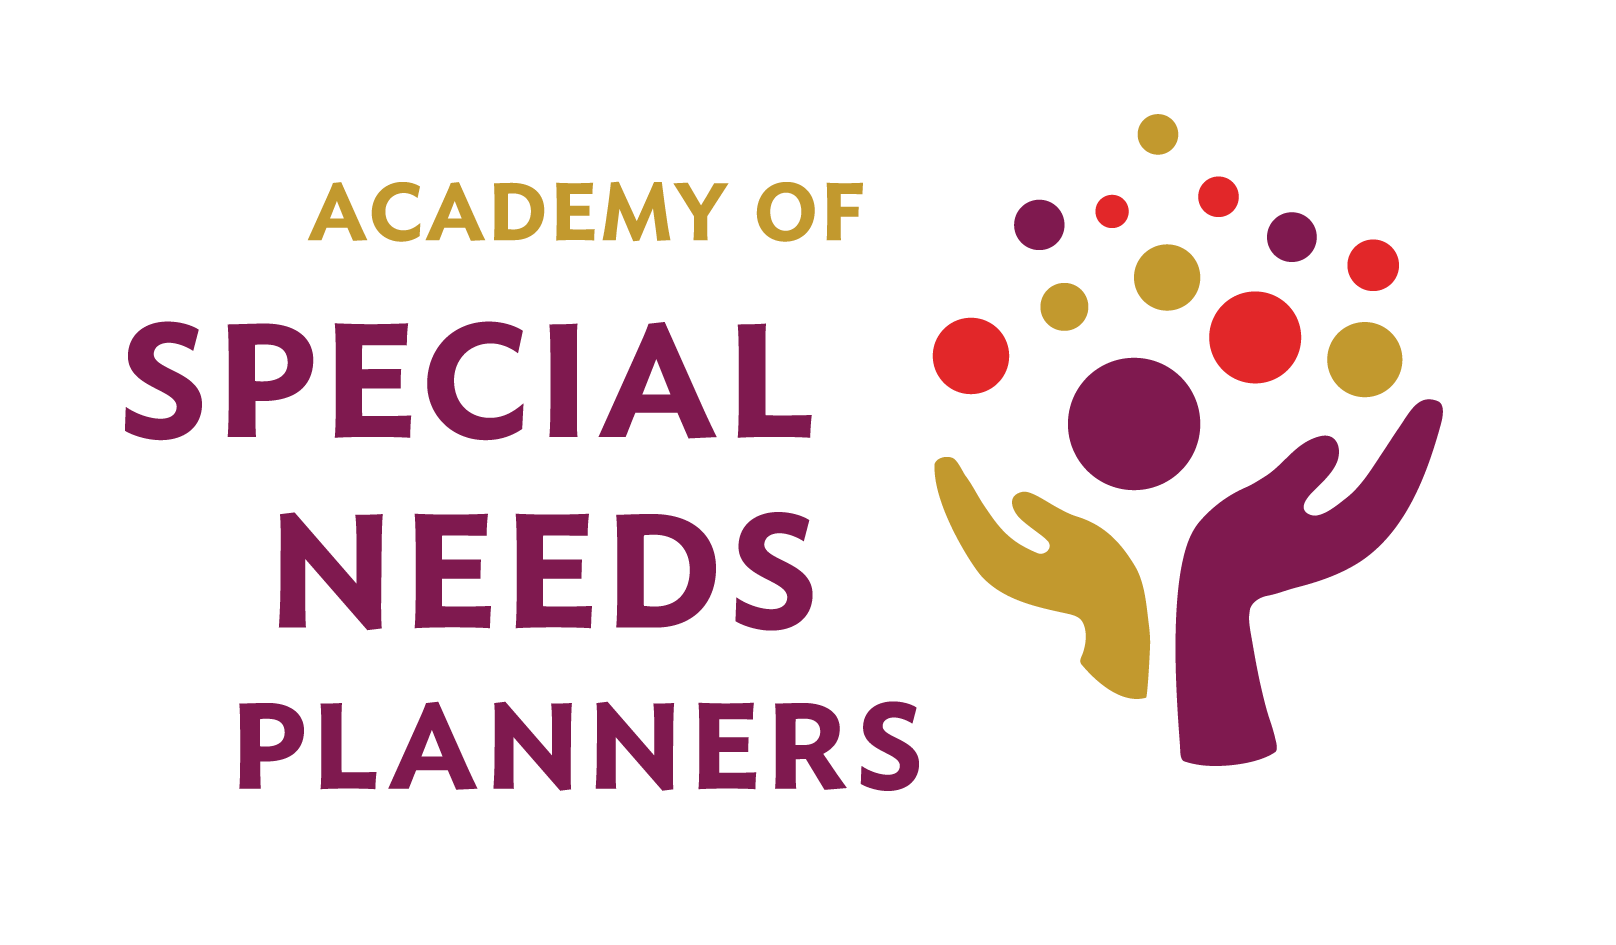 We are members of the Academy of Special Needs Planners